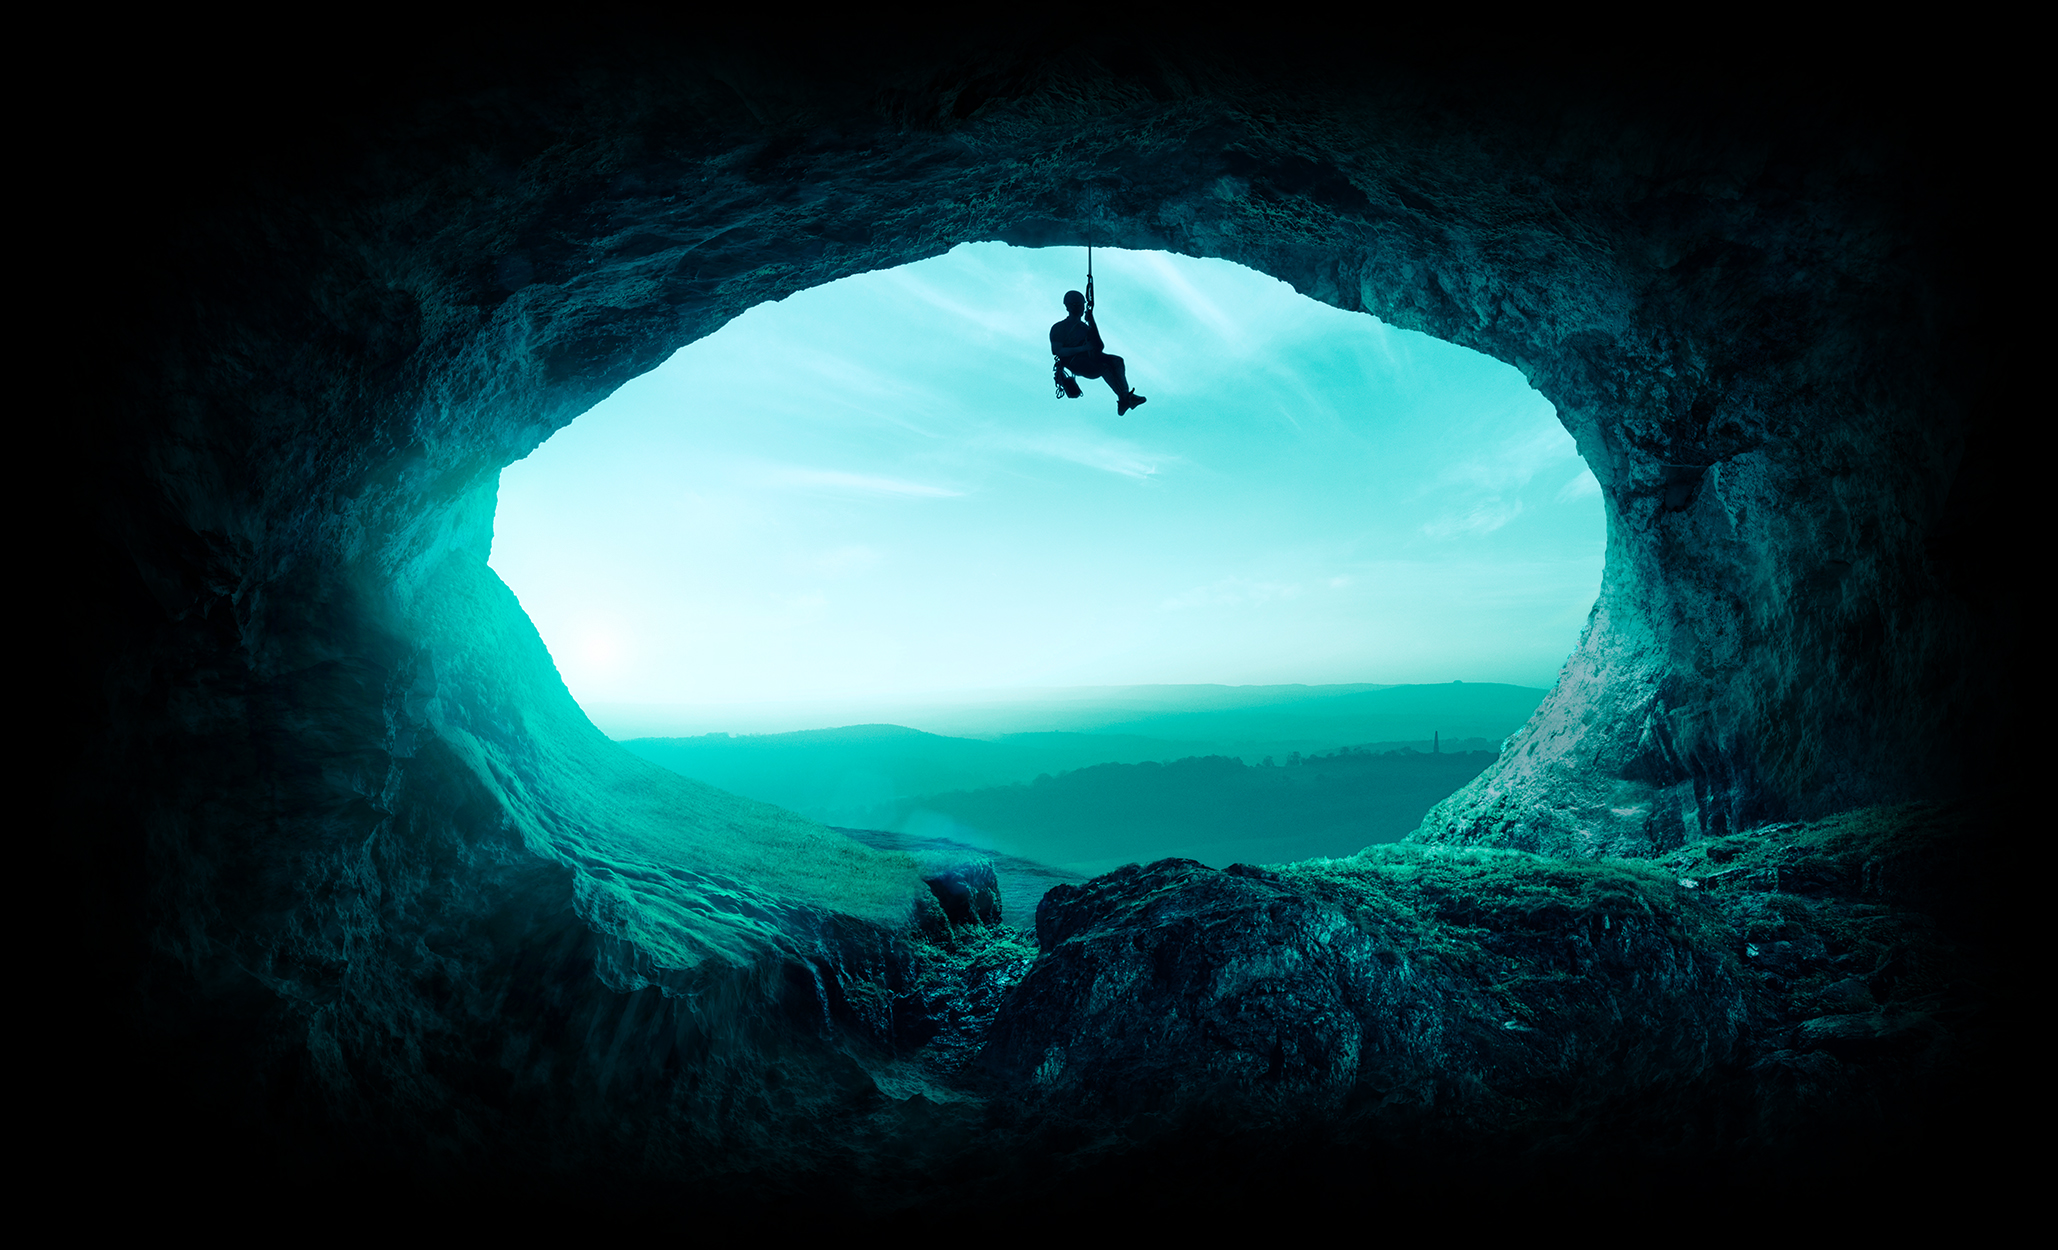 Image of a climber swinging from a mouth of a cave